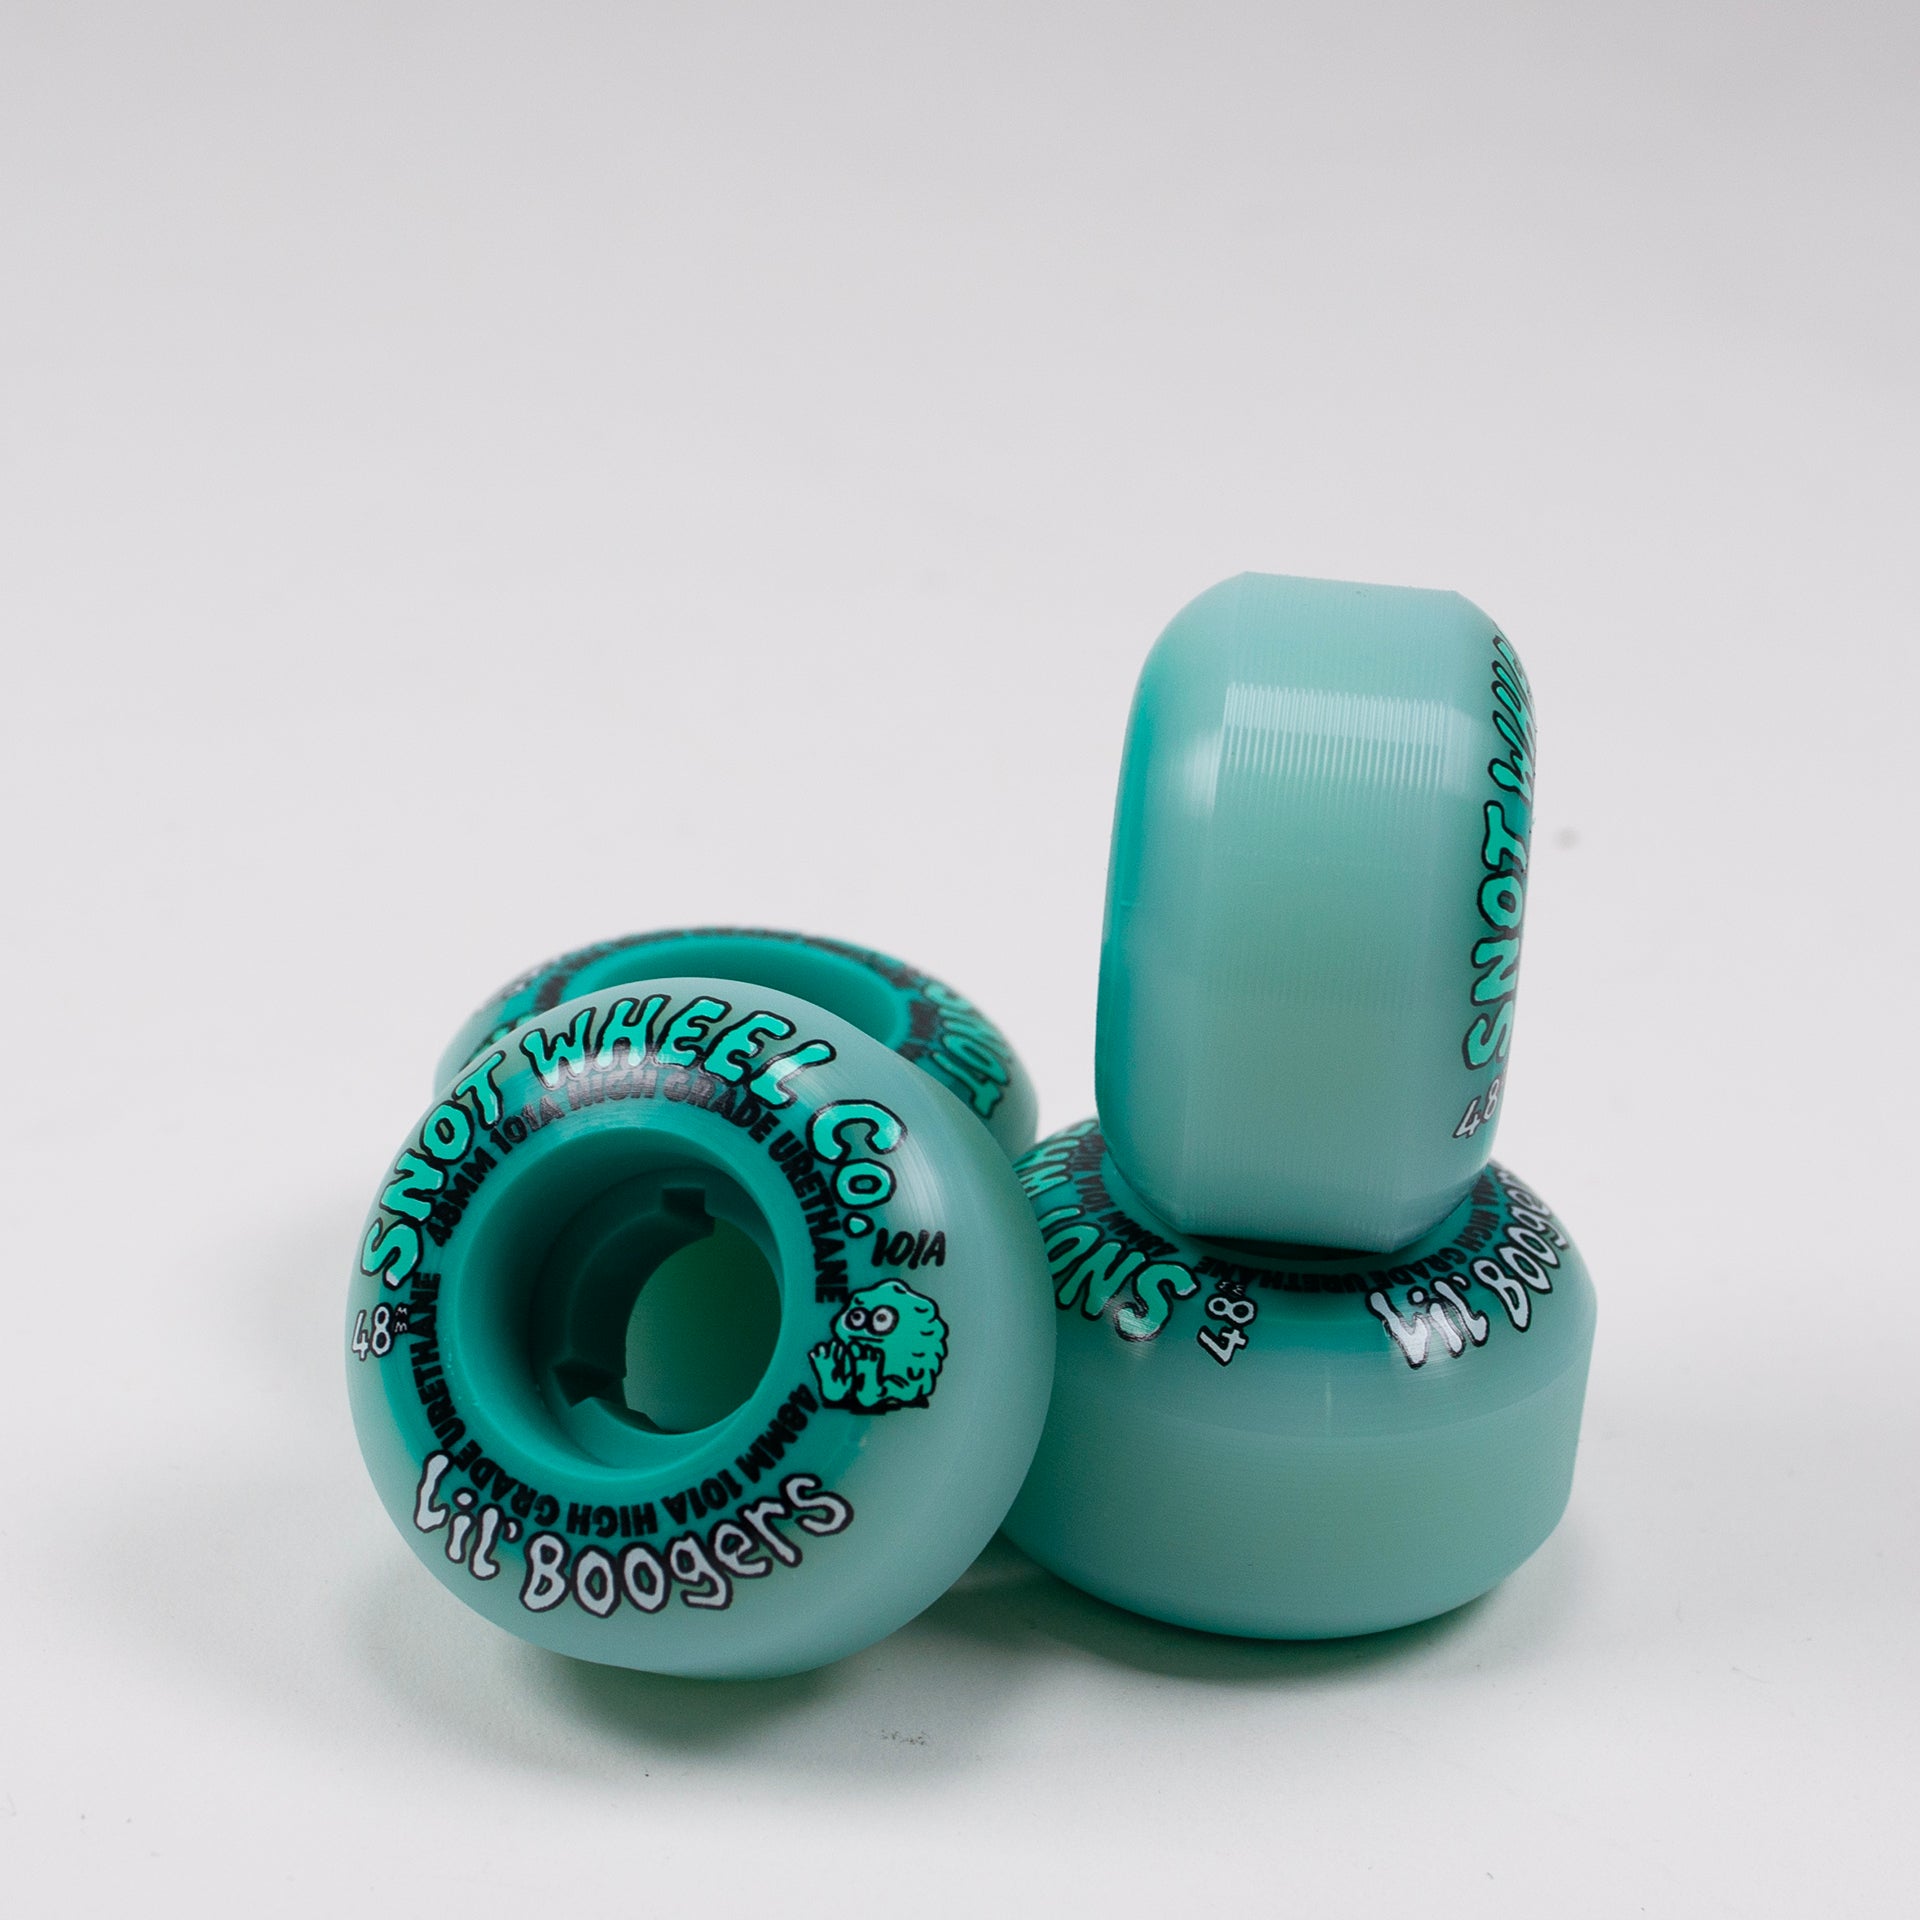 Snot - 48mm - 101a Lil Boogers Wheels - Teal - Prime Delux Store